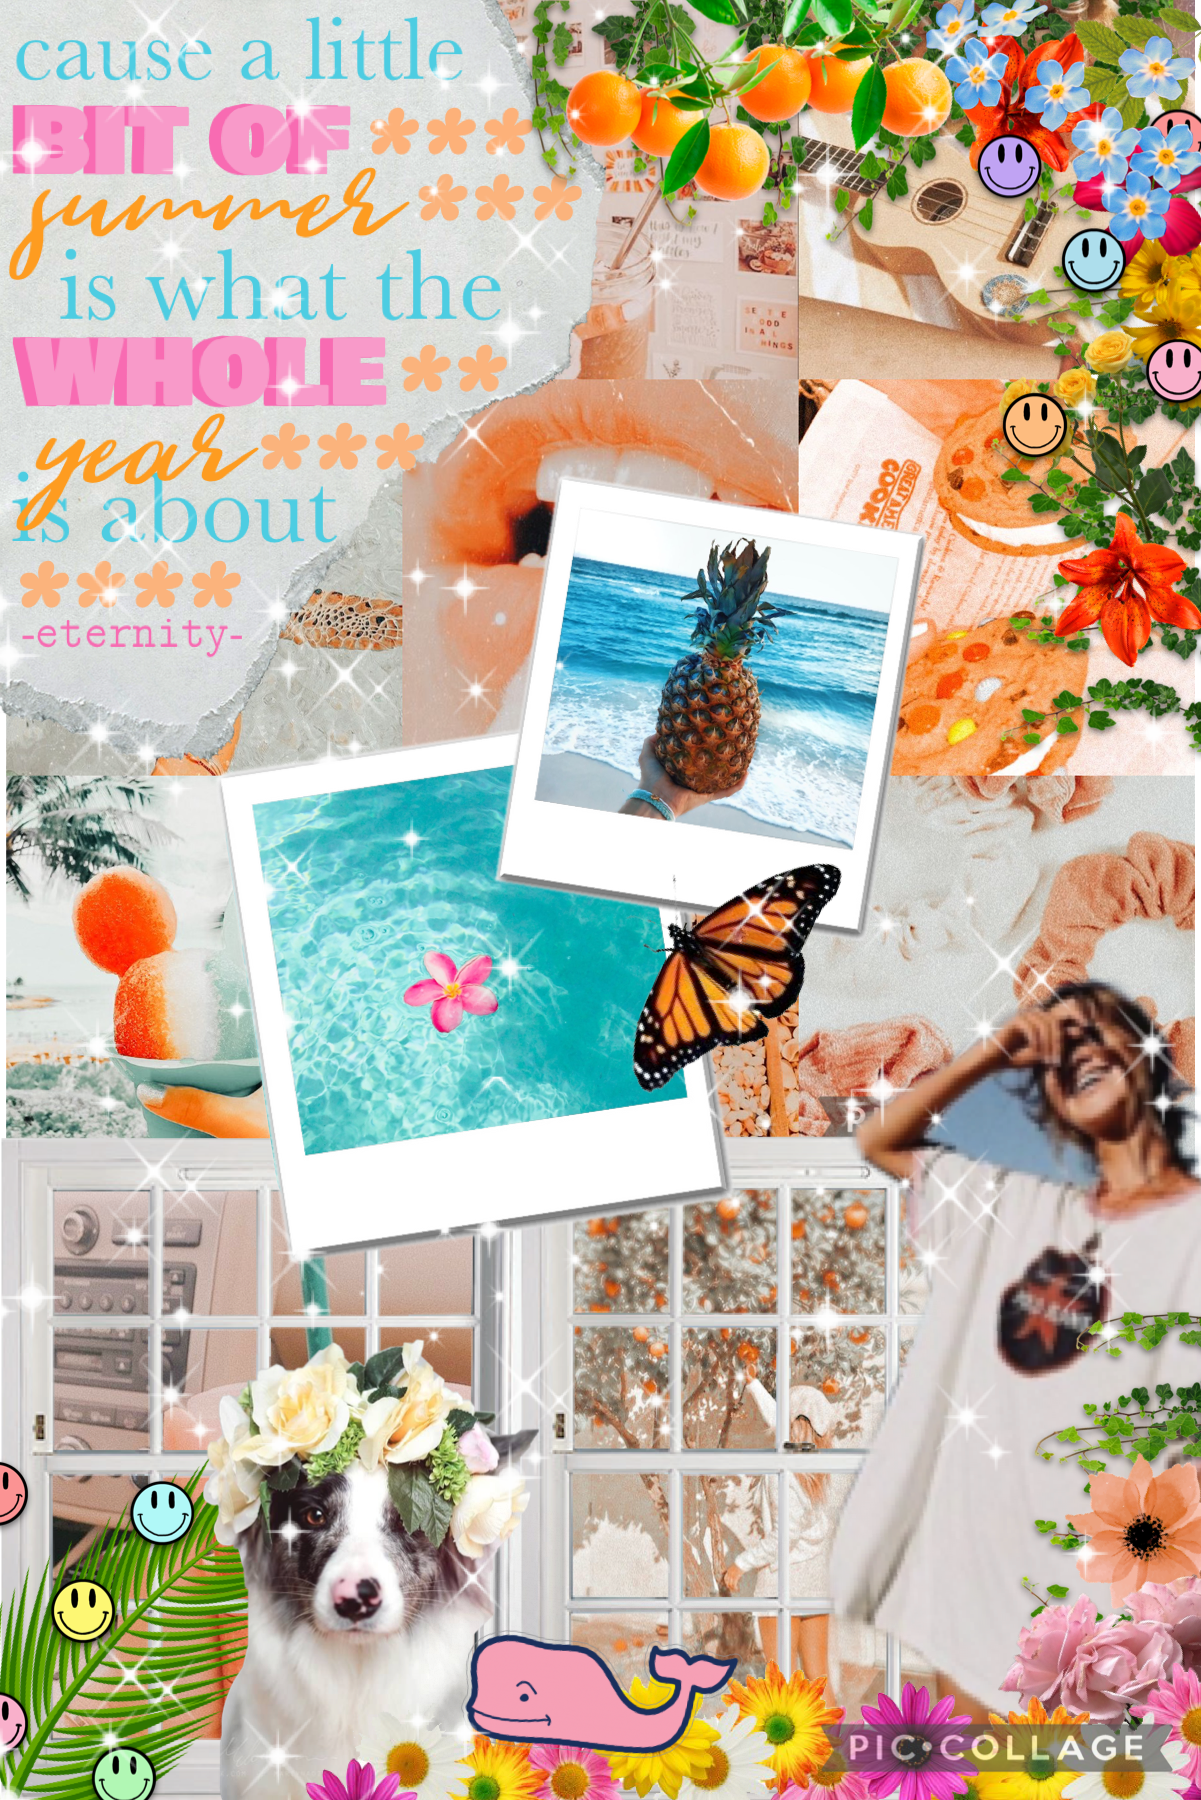 🌴tap angels🌴

inspo by @violet-sunsets • hers is sooo much better than mine, but i also think mine turned out good • i would have added more thinks but only 50 things (elements) are allowed in a collage 😤 • i tried/am trying to do a new theme kinda summer